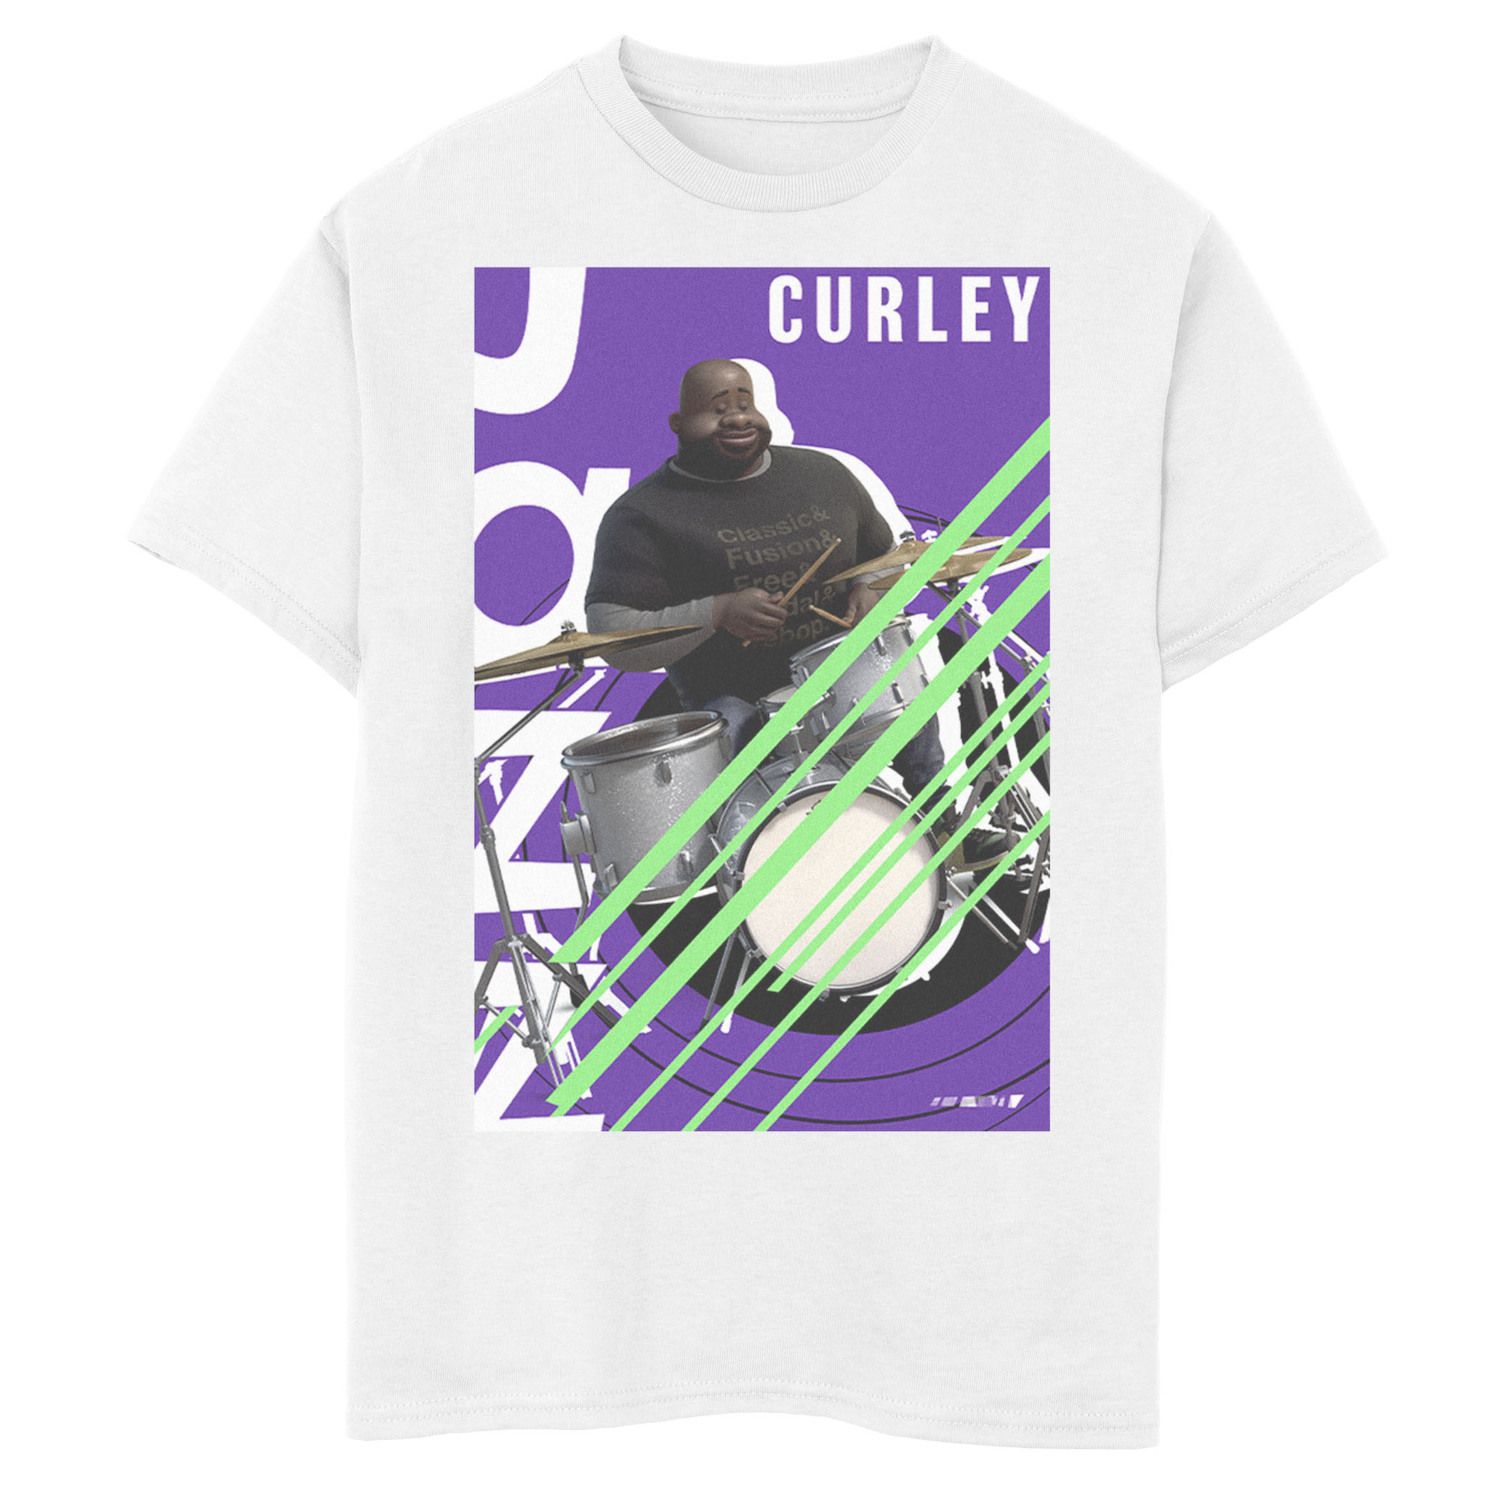 Image for Disney / Pixar 's Soul Boys 8-20 Curley Jazz Poster Graphic Tee at Kohl's.